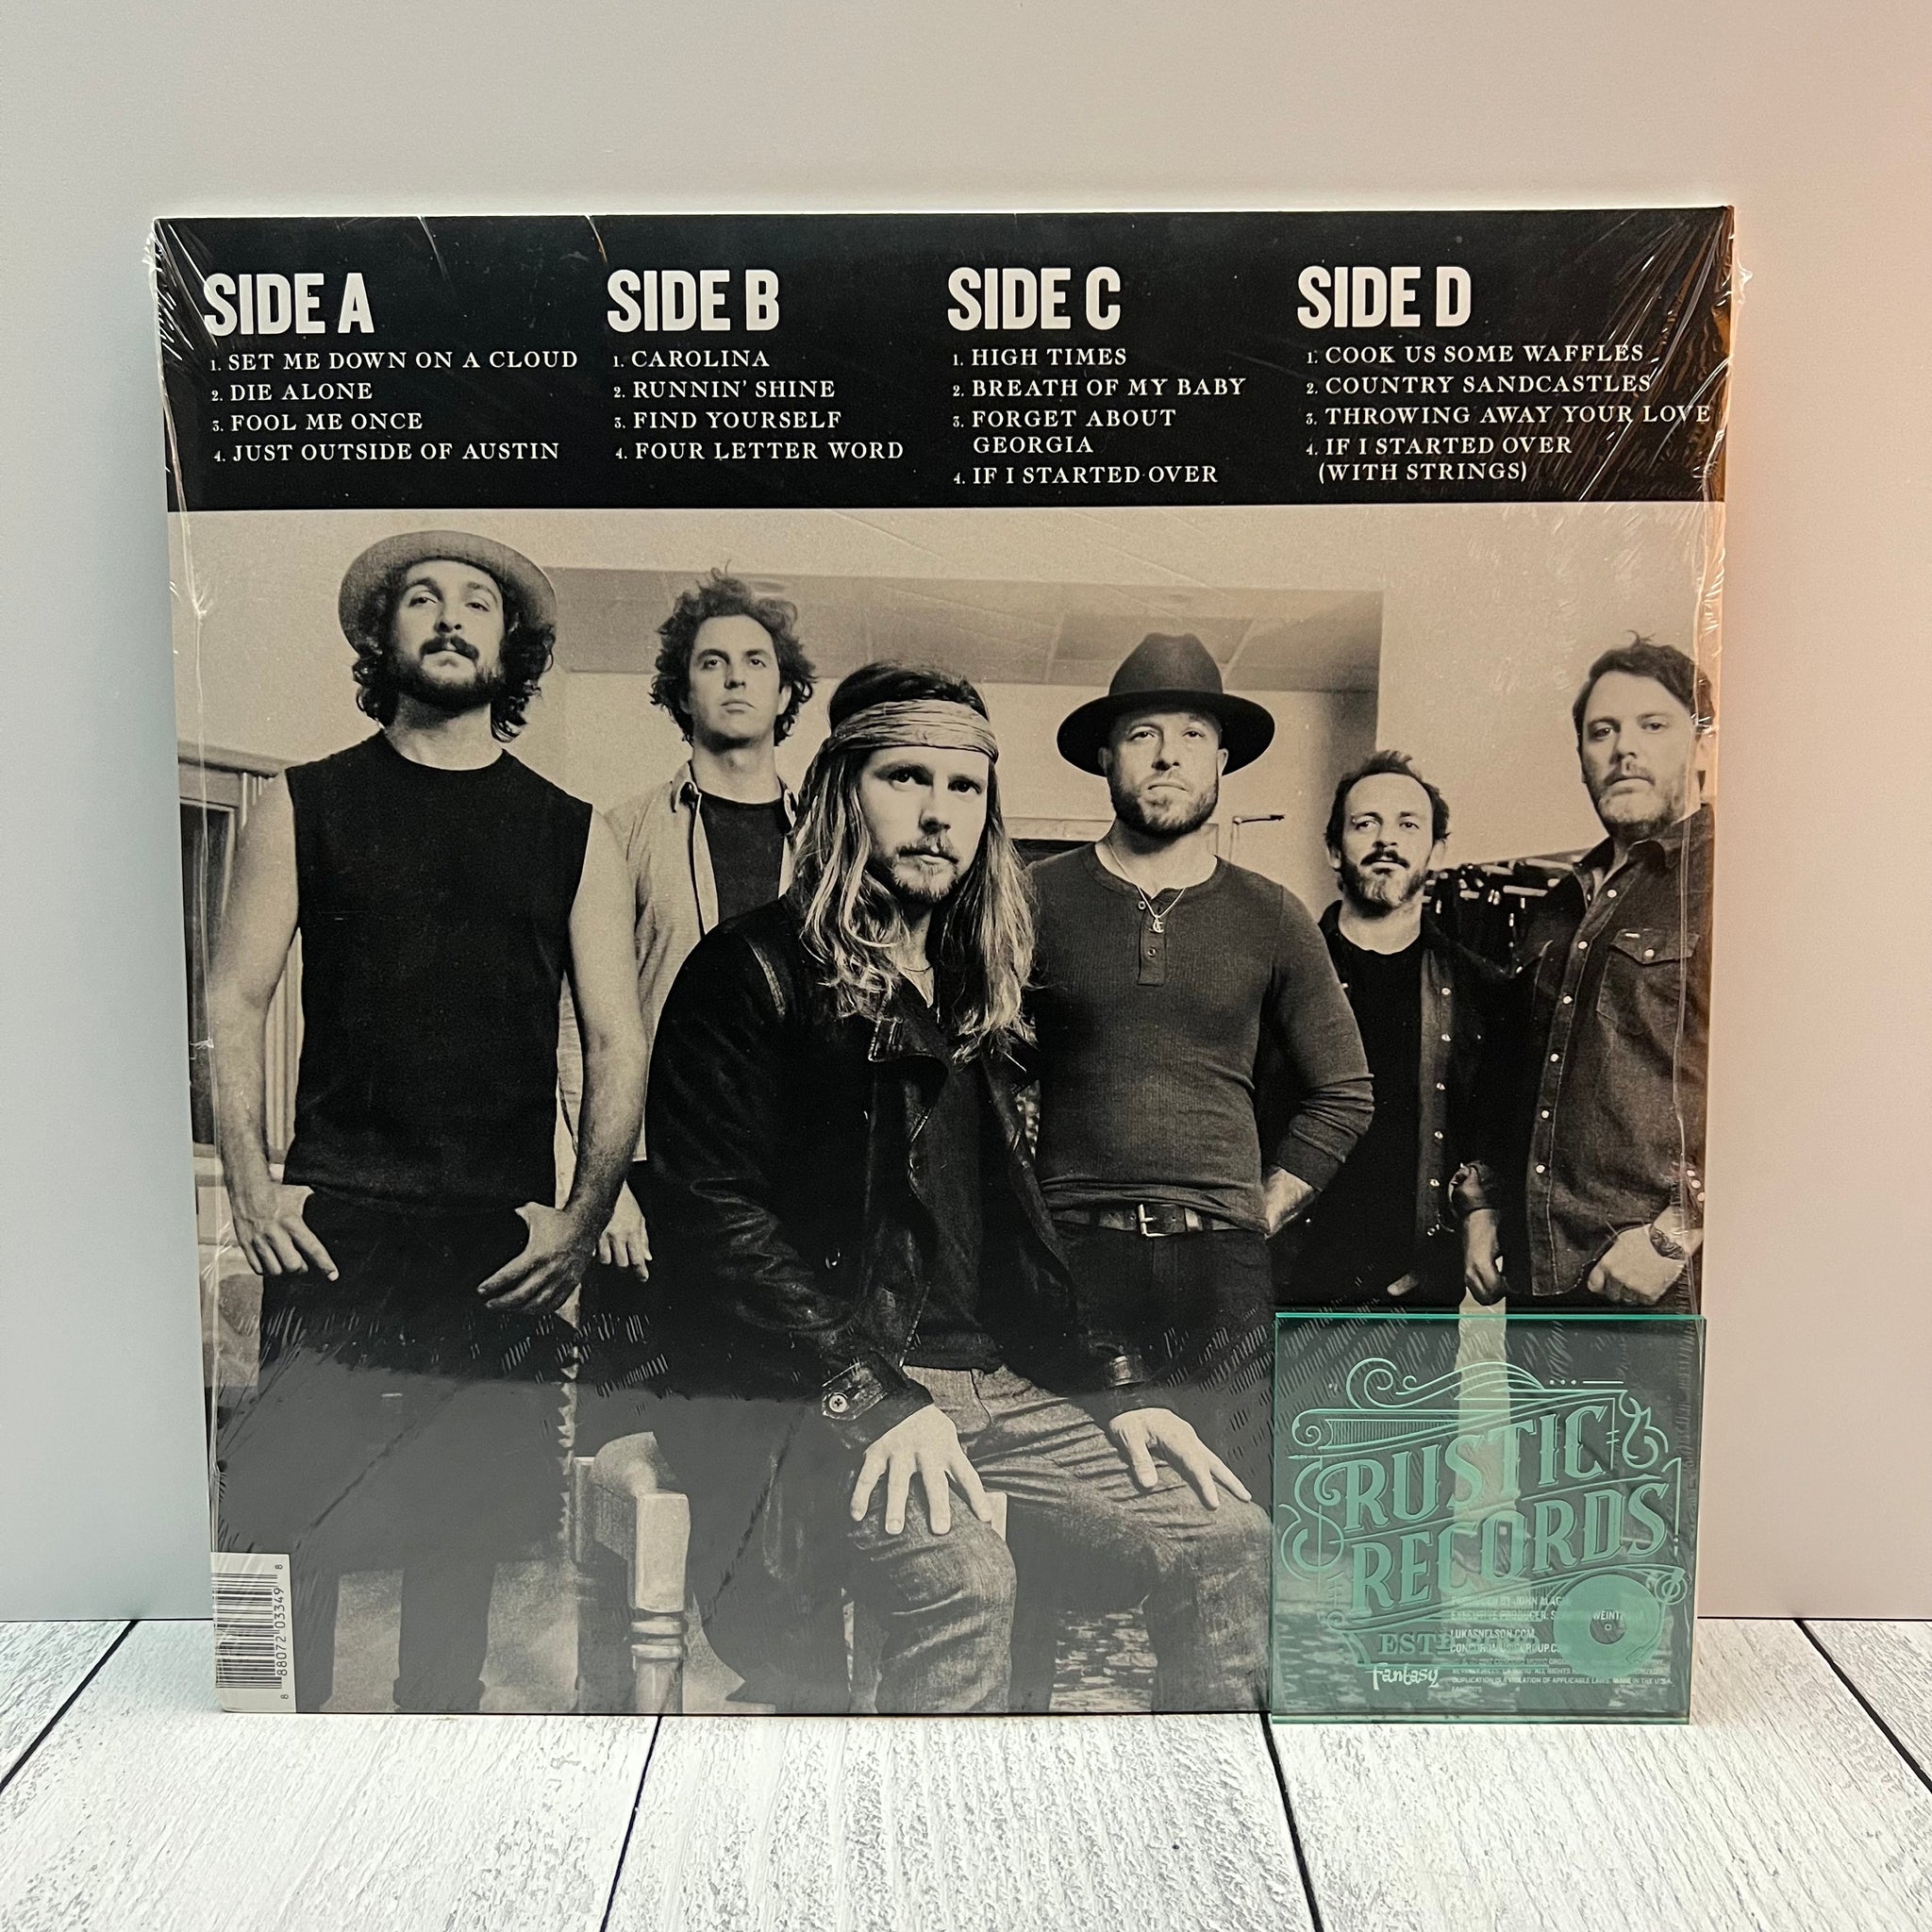 Lukas Nelson & Promise Of The Real - Lukas Nelson & Promise Of The Real